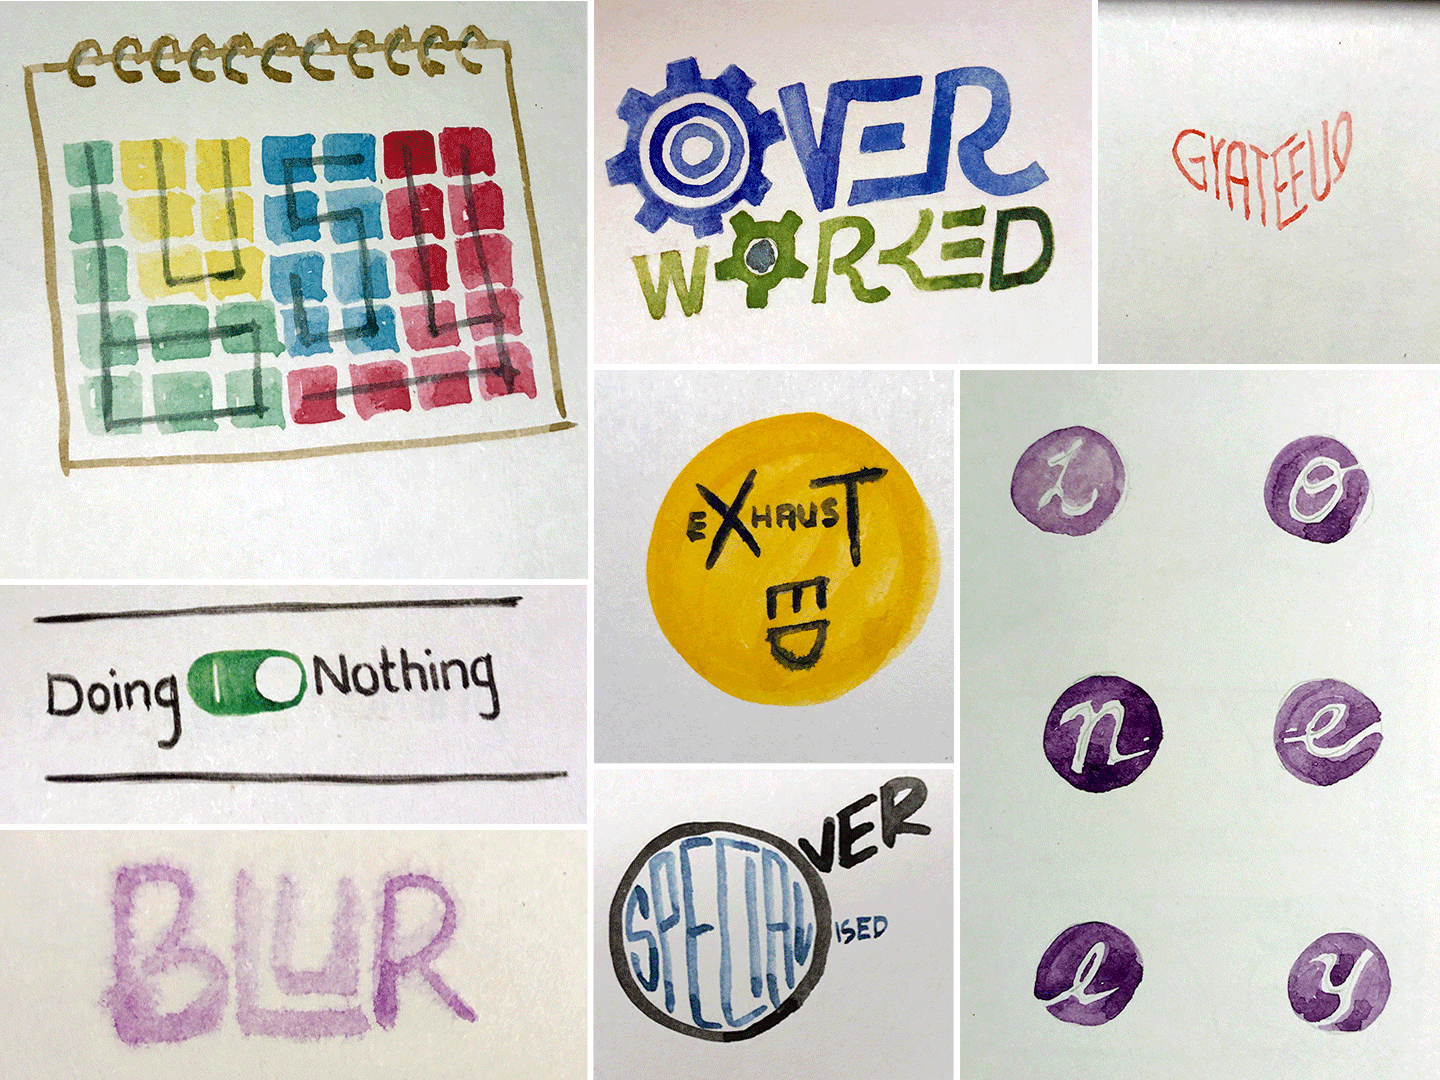 Collage of expressive typography using watercolours. The words expressed are: Busy, Doing Nothing, Blur, Over-worked, Exhausted, Overspecialised, Grateful and Lonely.